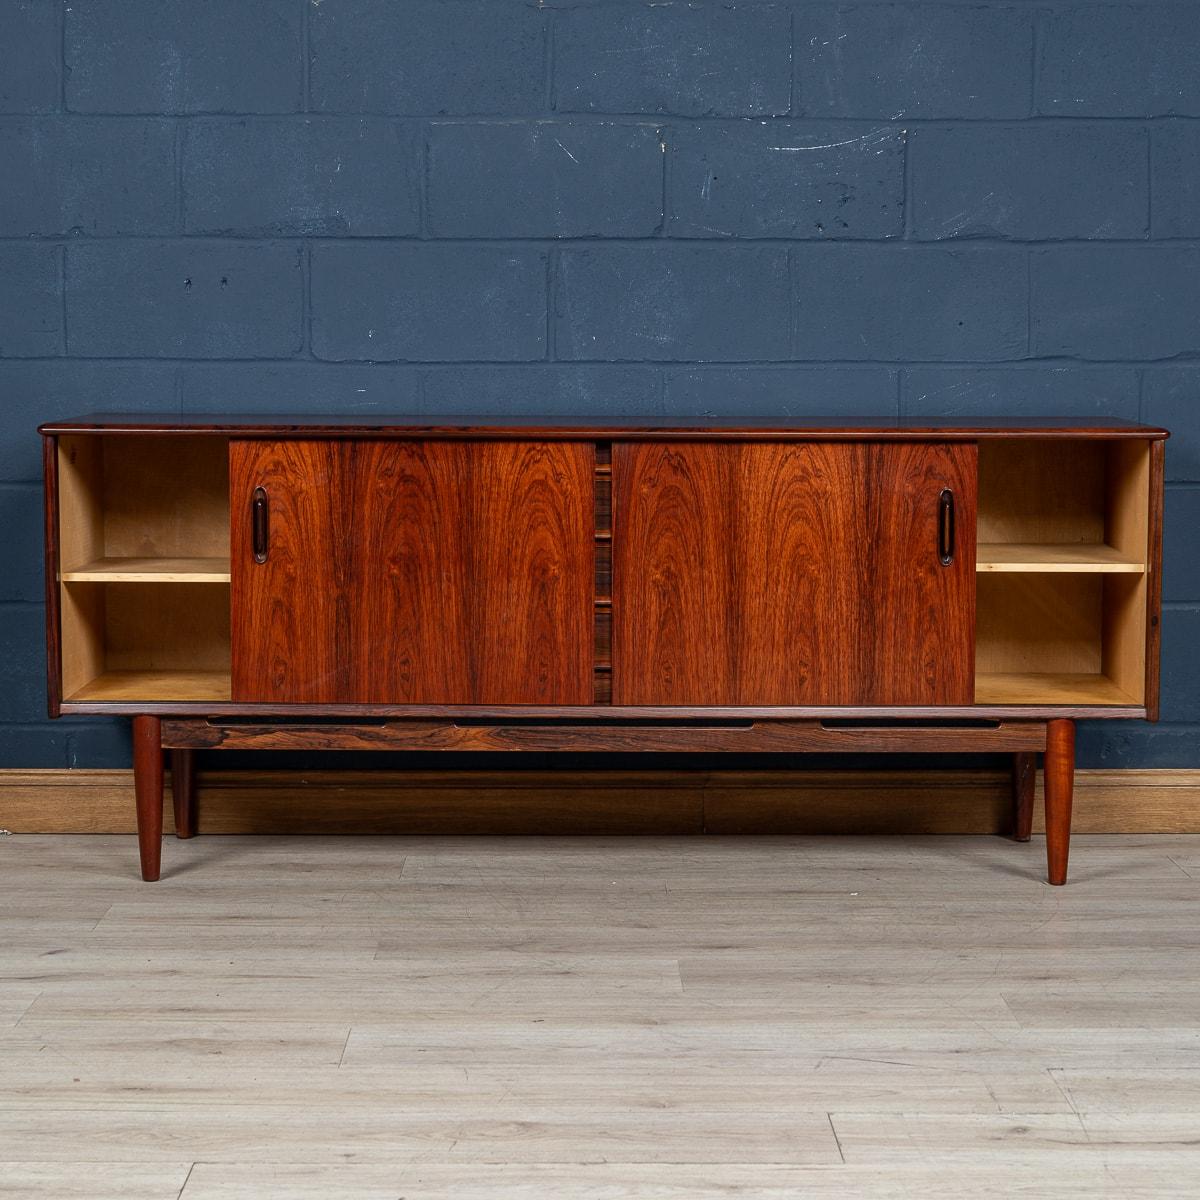 Other 20th Century Scandinavian Rosewood Sideboard By Troeds Of Bjarnum, Sweden c.1960 For Sale